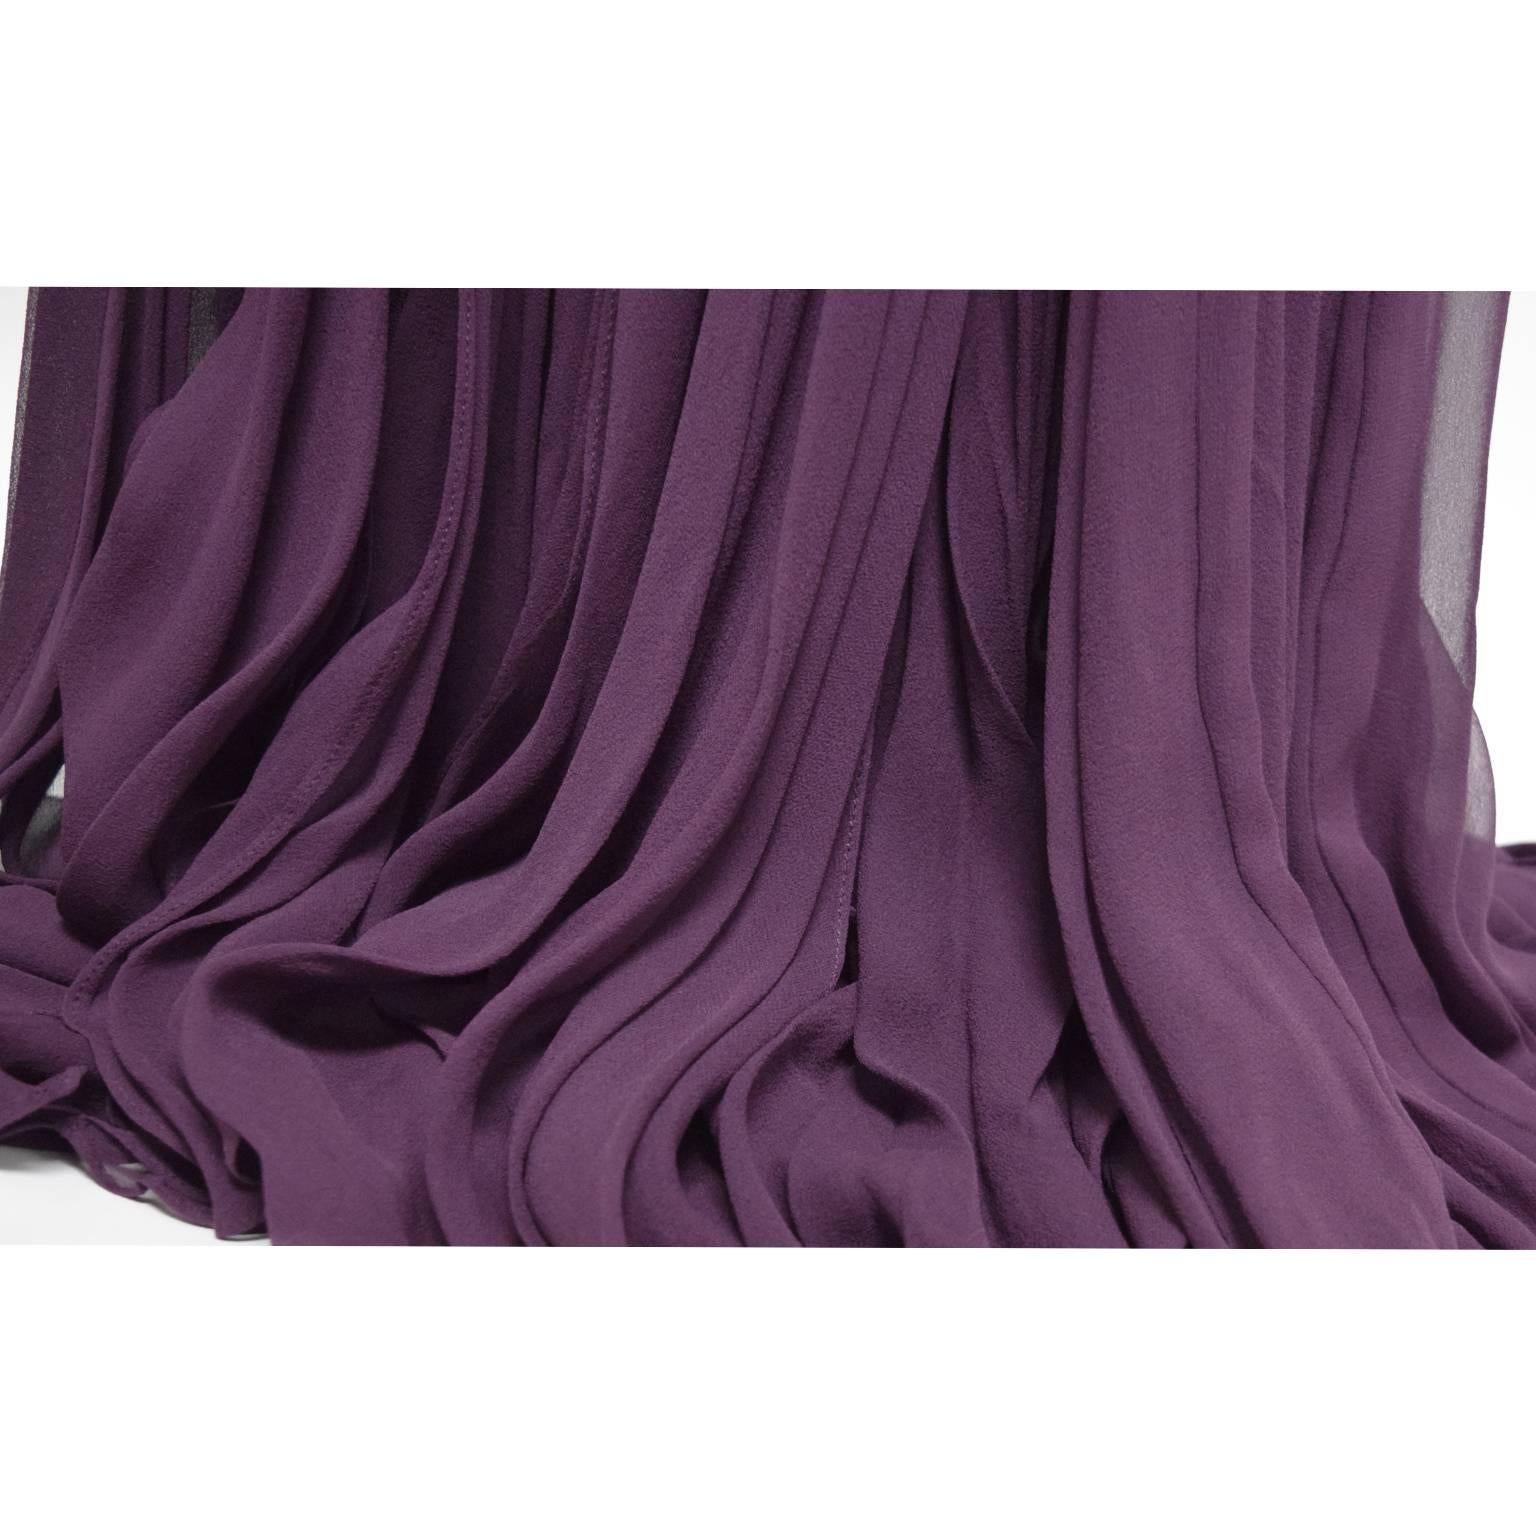 Herve Leger Merlot Banded Bodice with Carwash Silk Skirt Gown In Excellent Condition For Sale In Henrico, VA